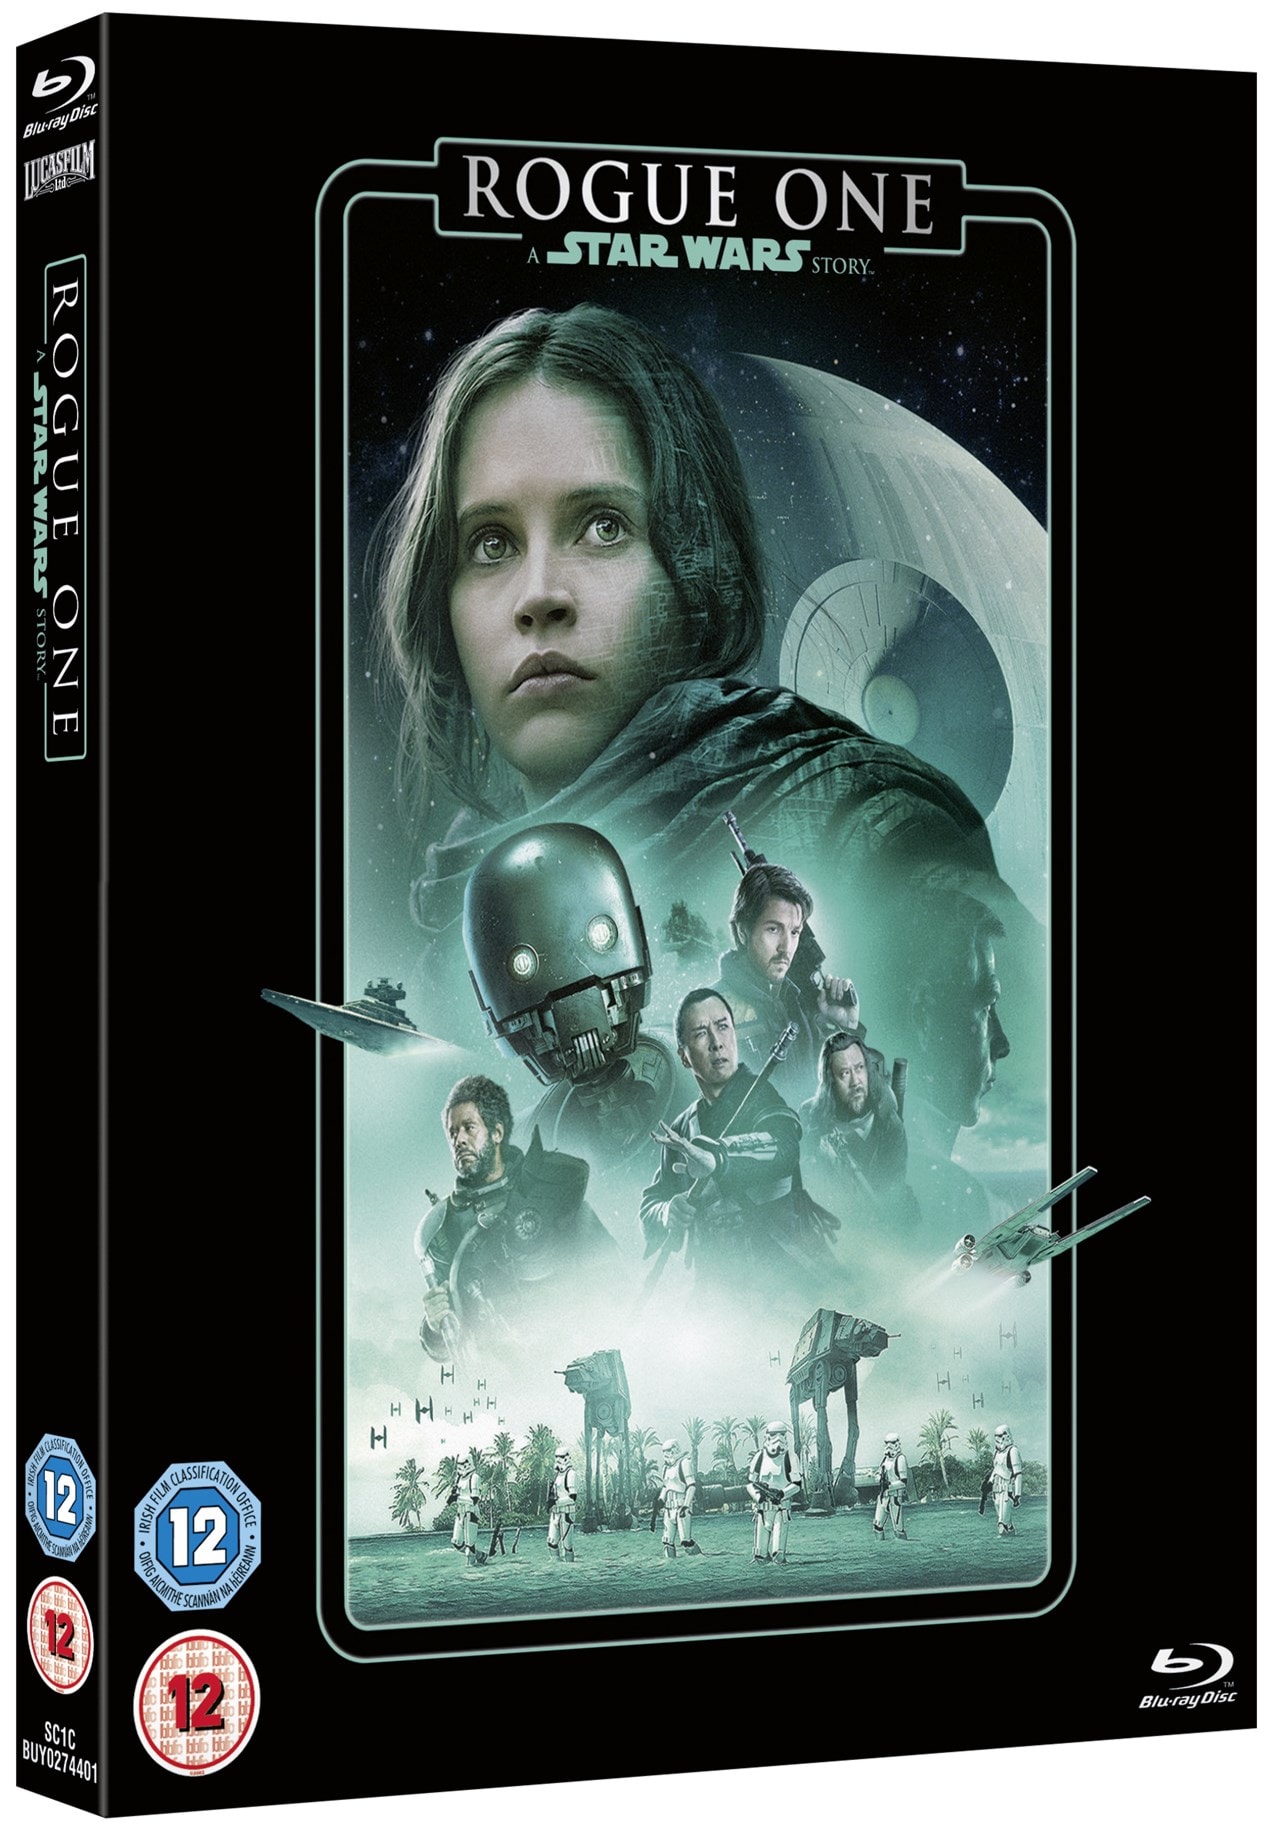 Rogue One - A Star Wars Story | Blu-ray | Free shipping over £20 | HMV Store